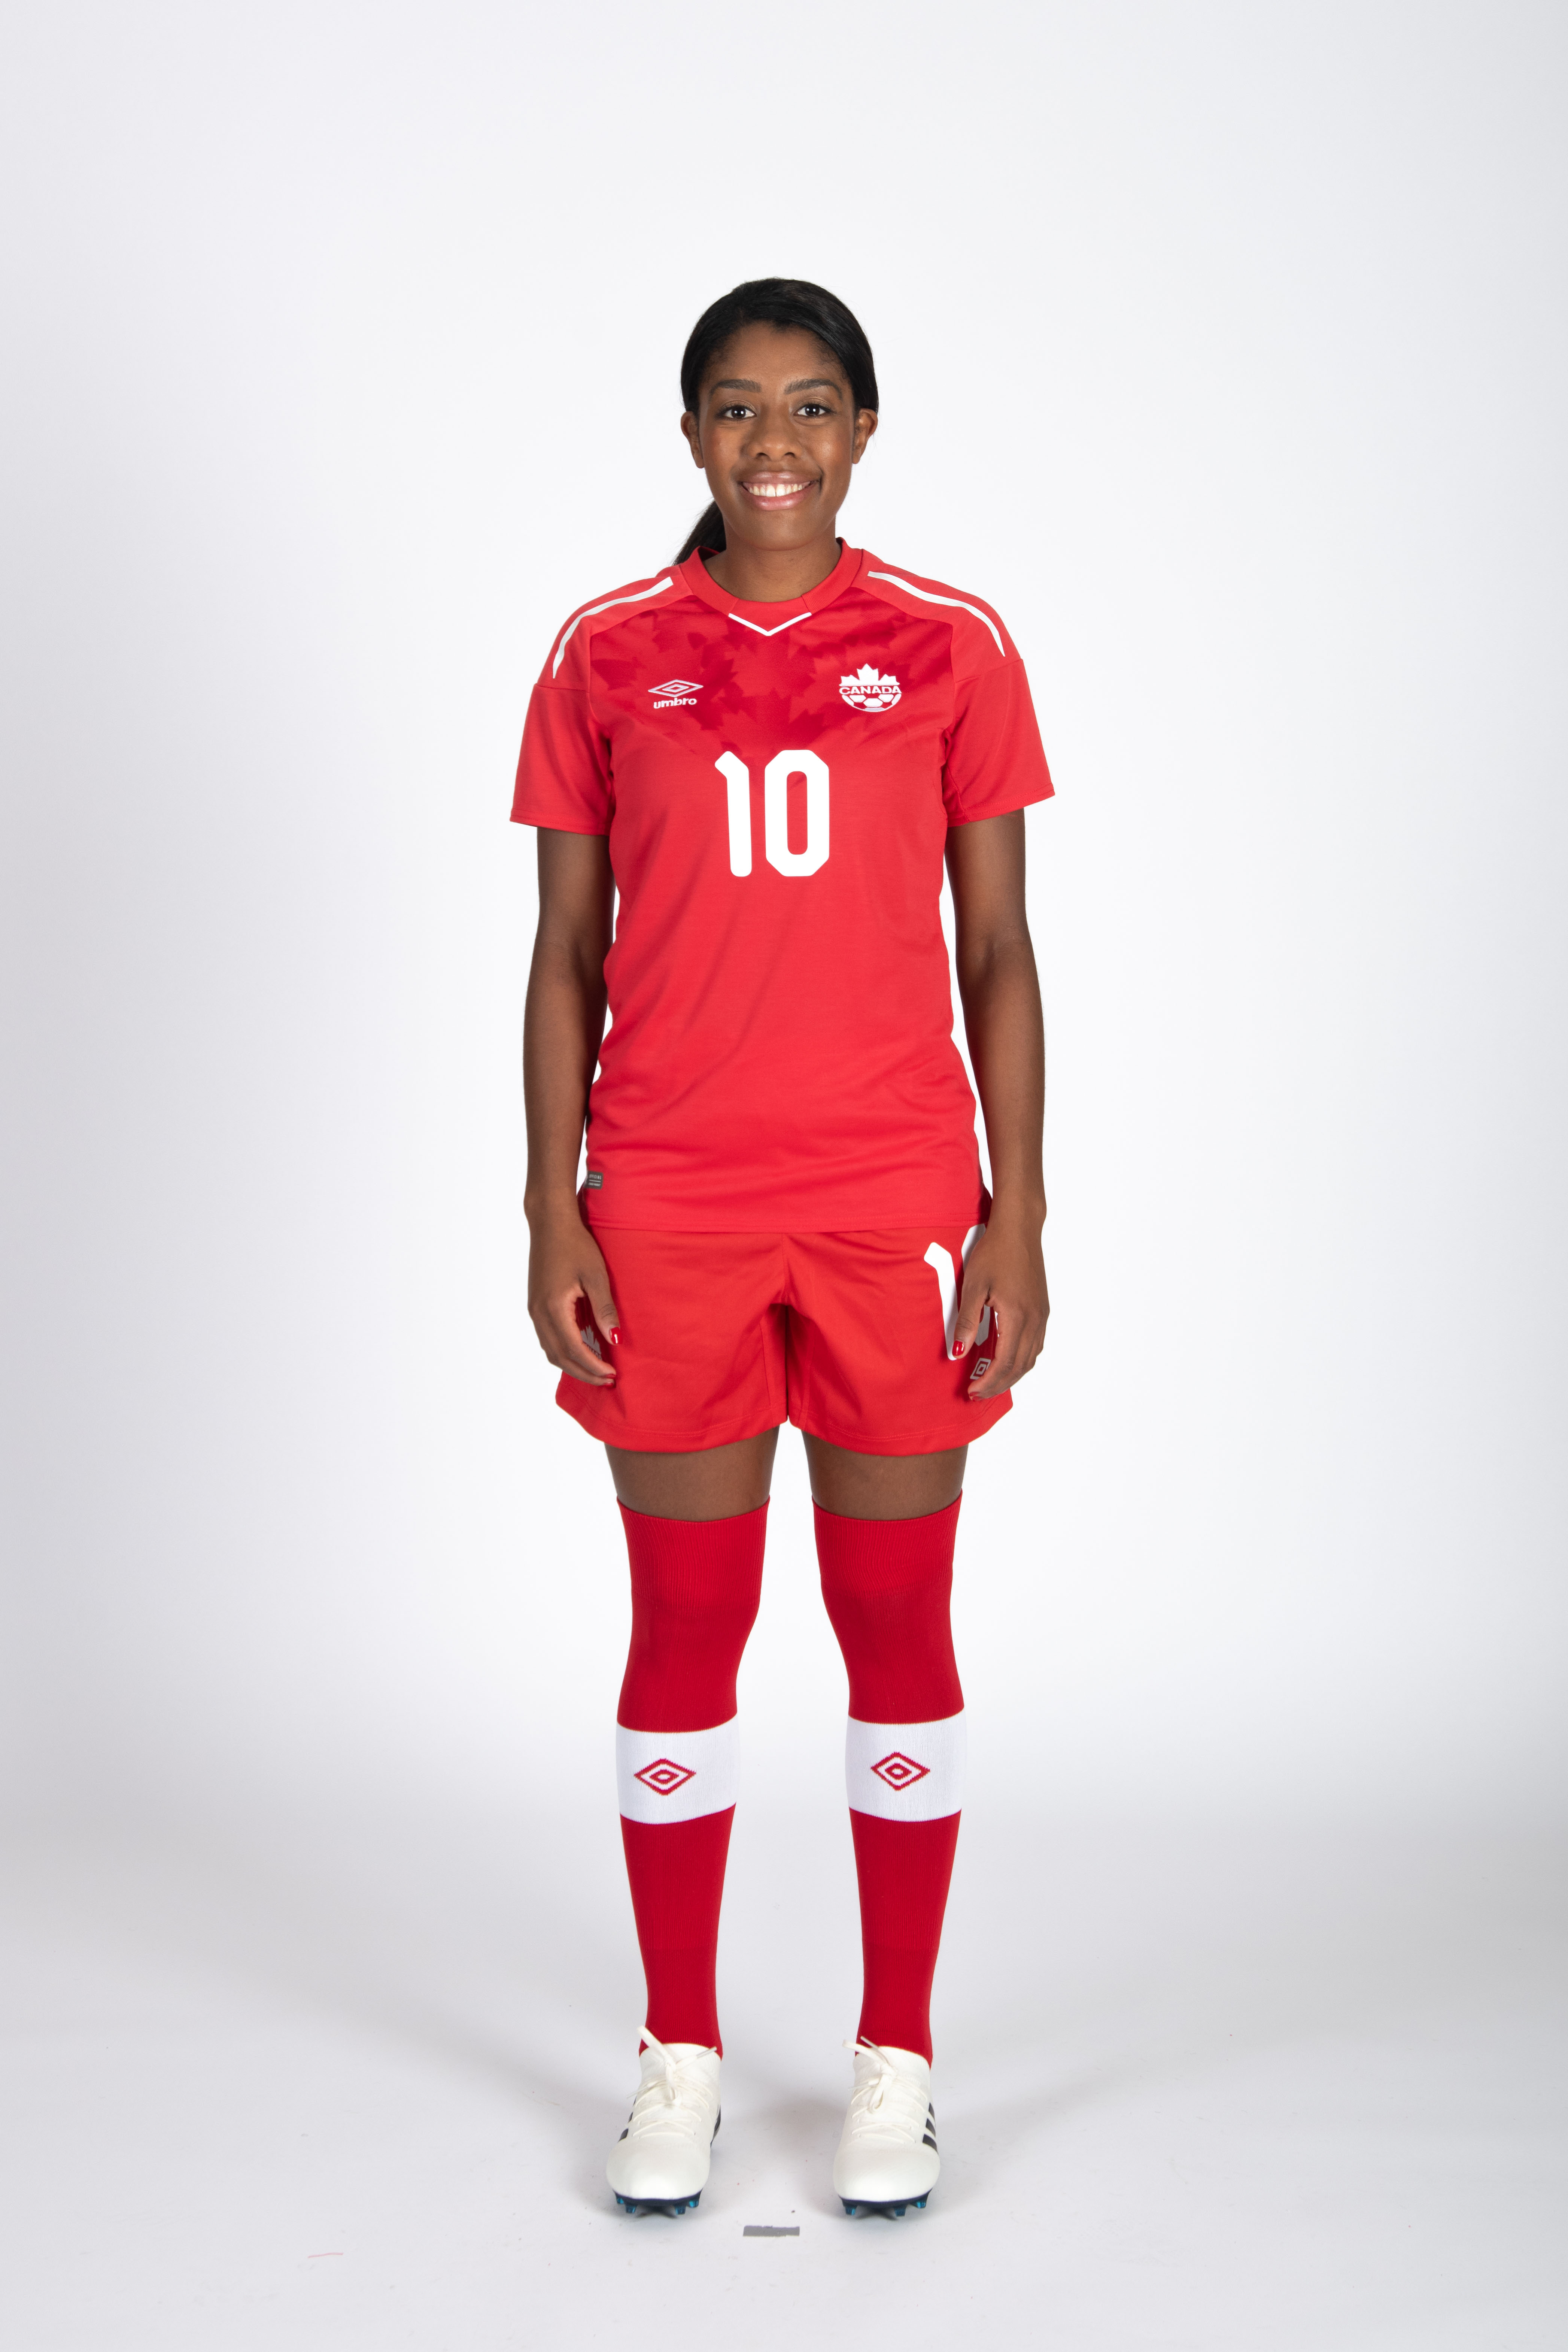 20180604_CANWNT_Lawrence_byBazyl06